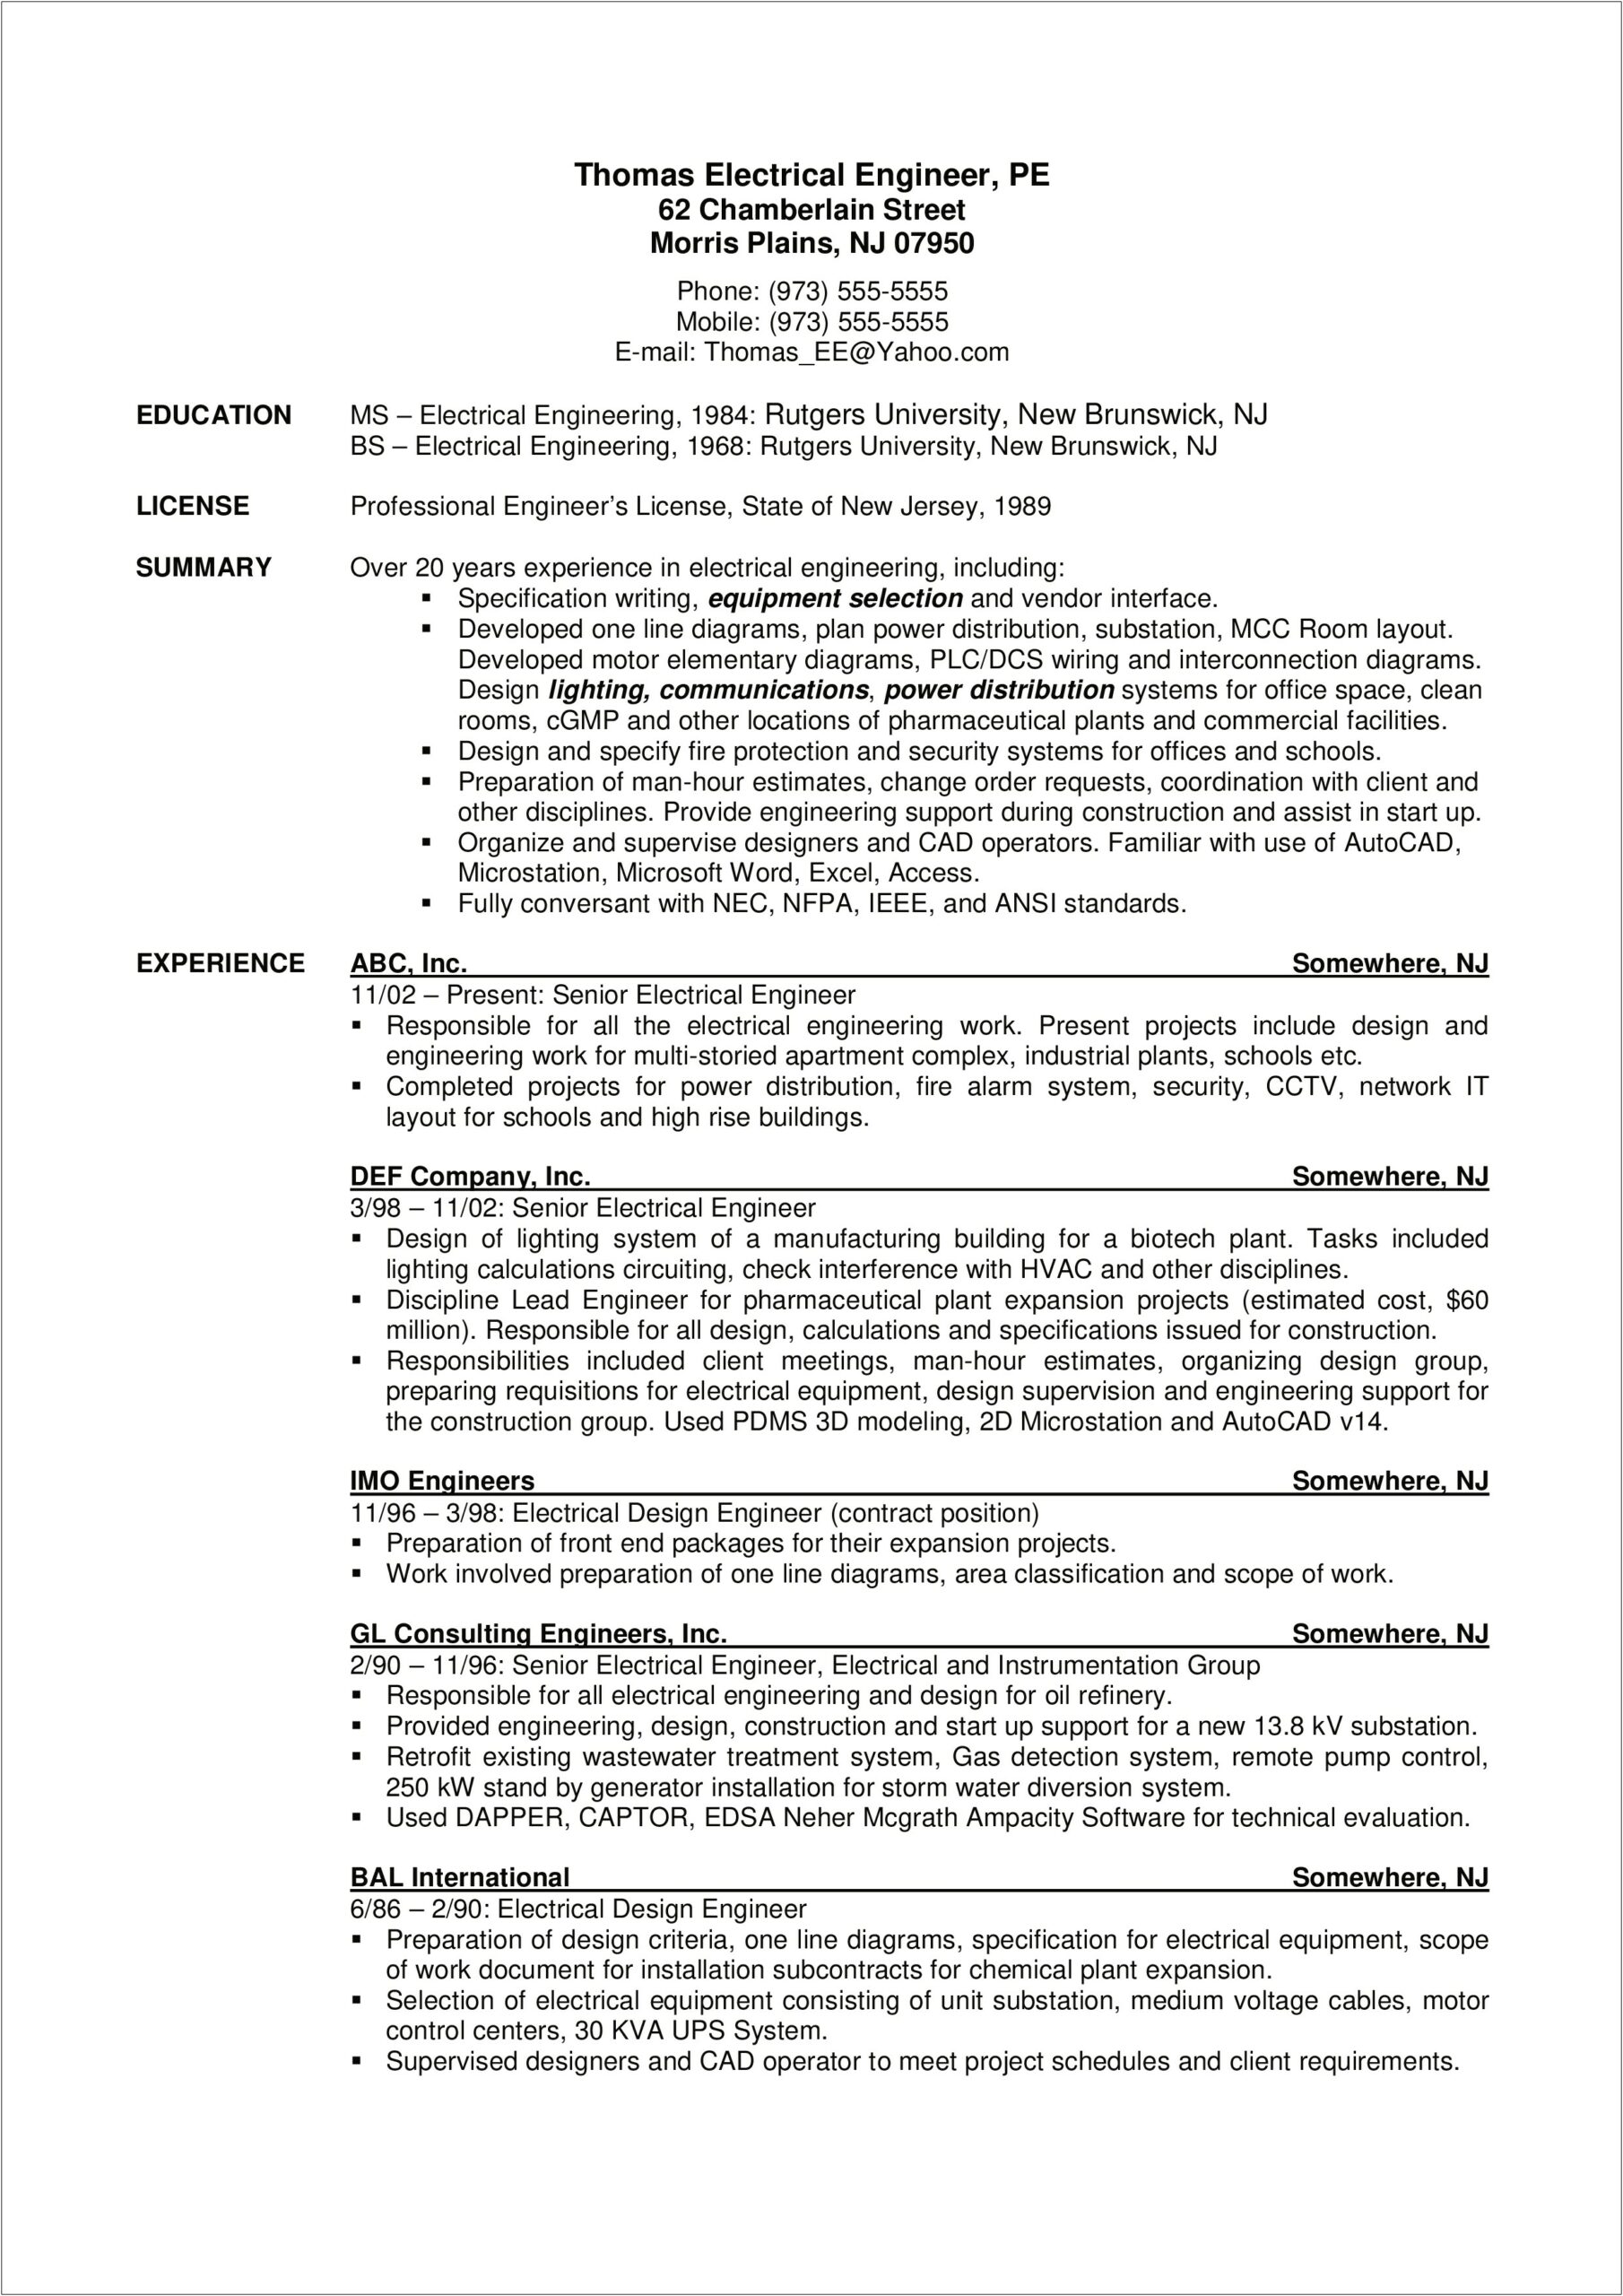 Electrical Site Engineer Experience Resume Format